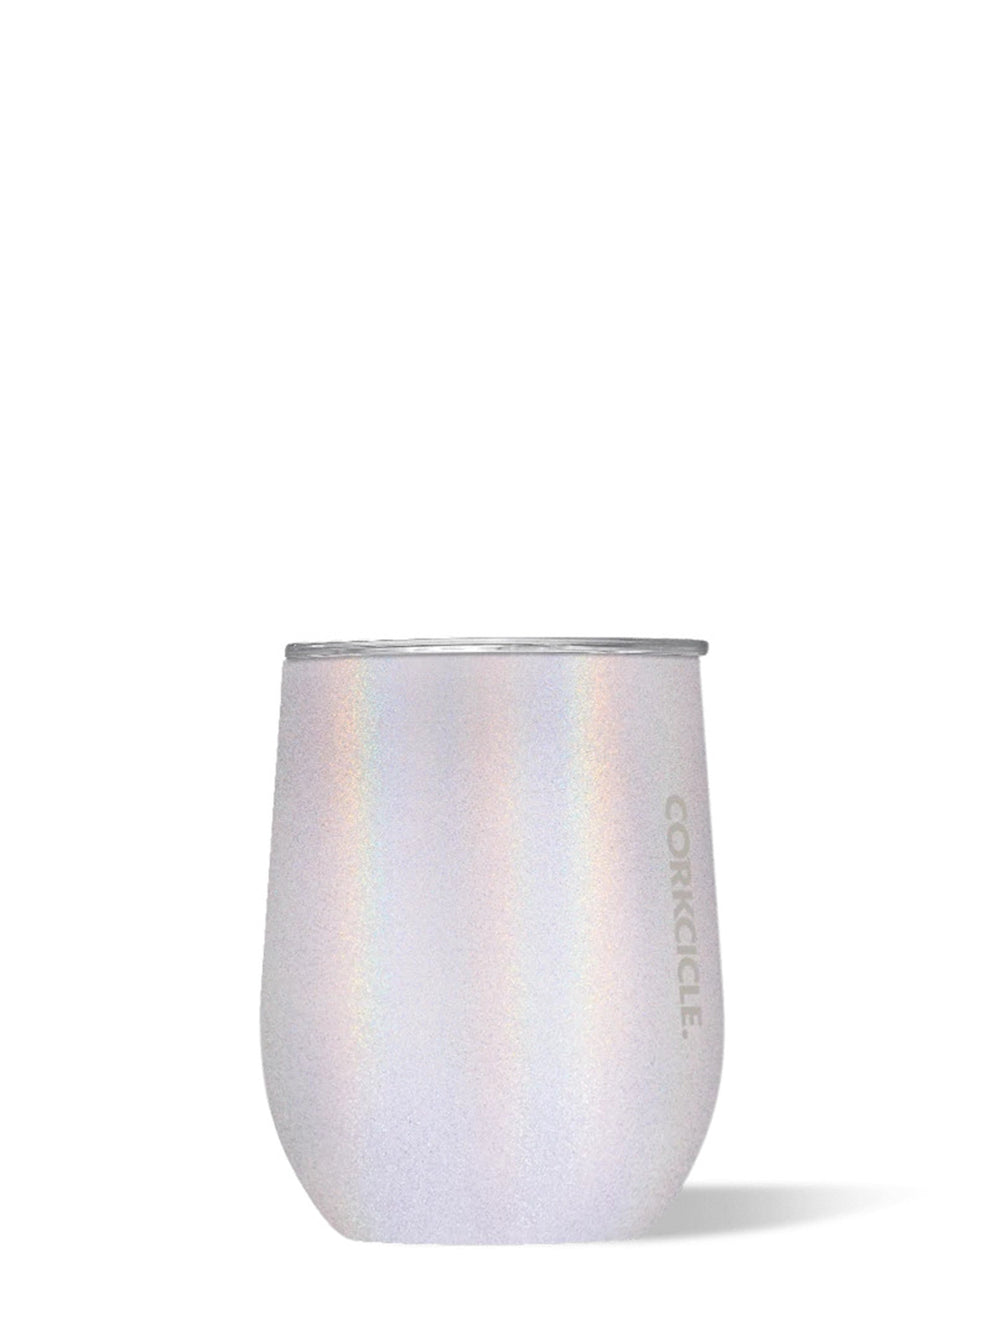 CORKCICLE STEMLESS - CLEARANCE